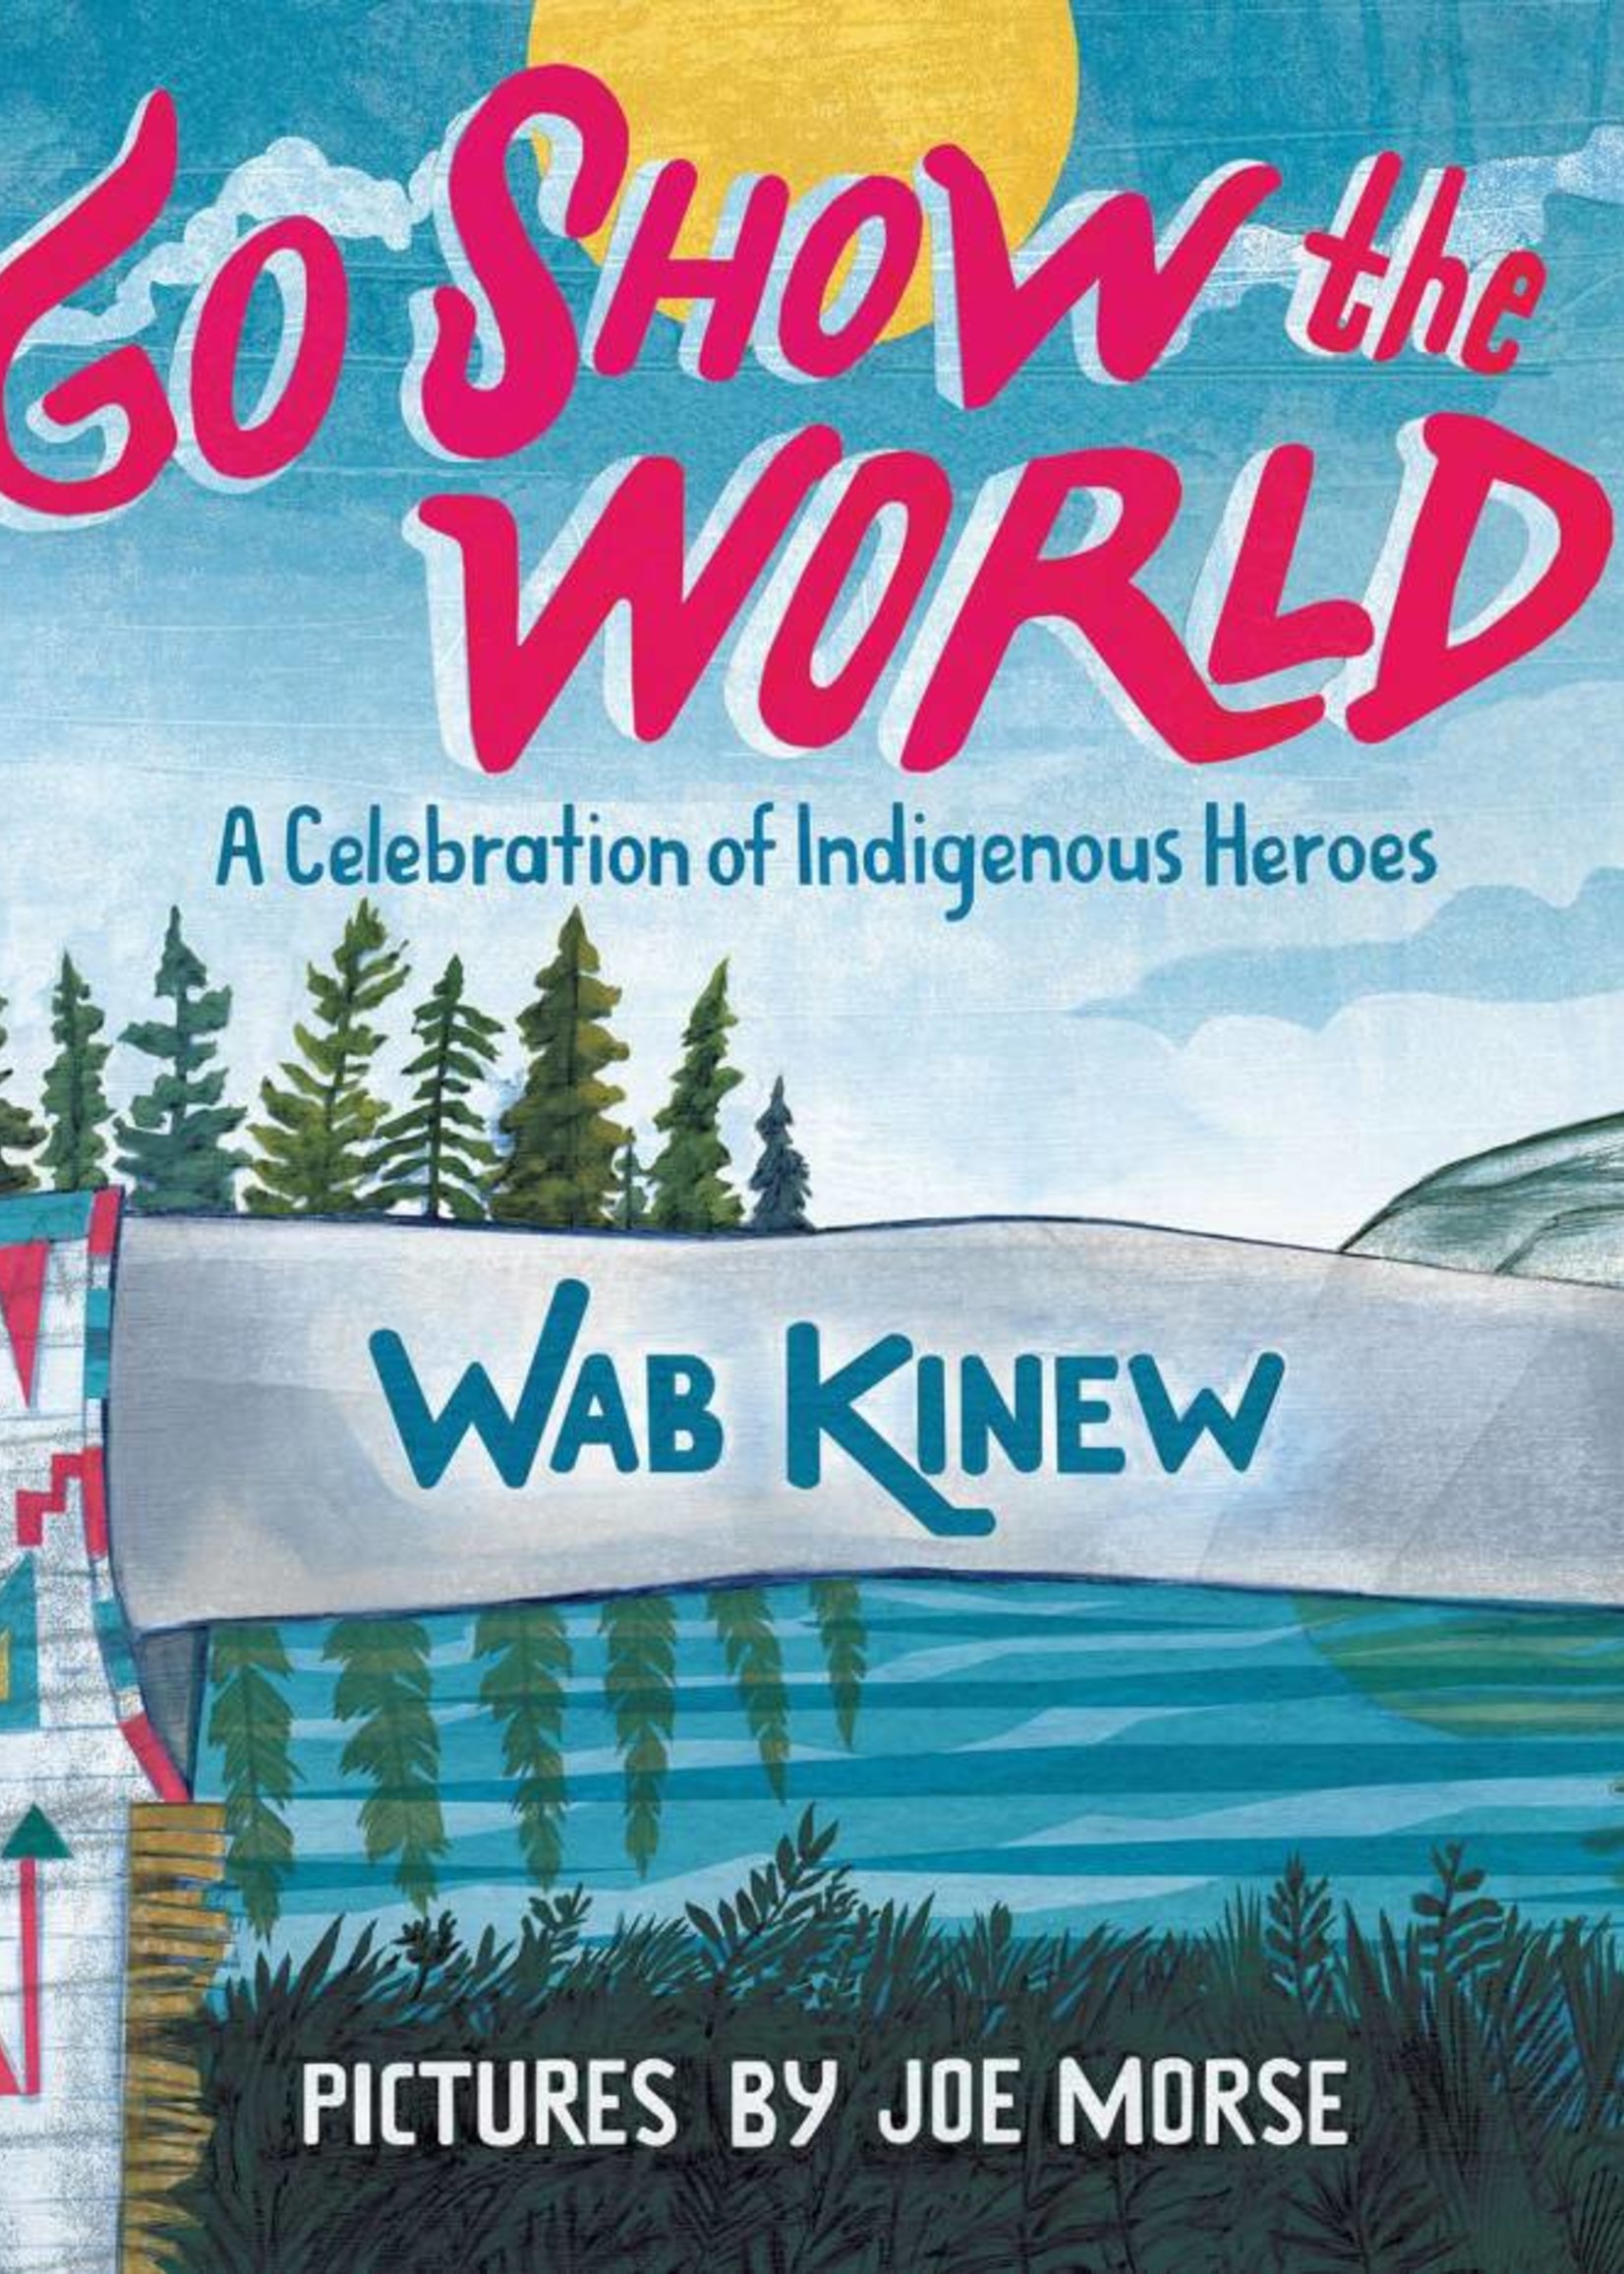 Go Show the World, A Celebration of Indigenous Heroes - Hardcover